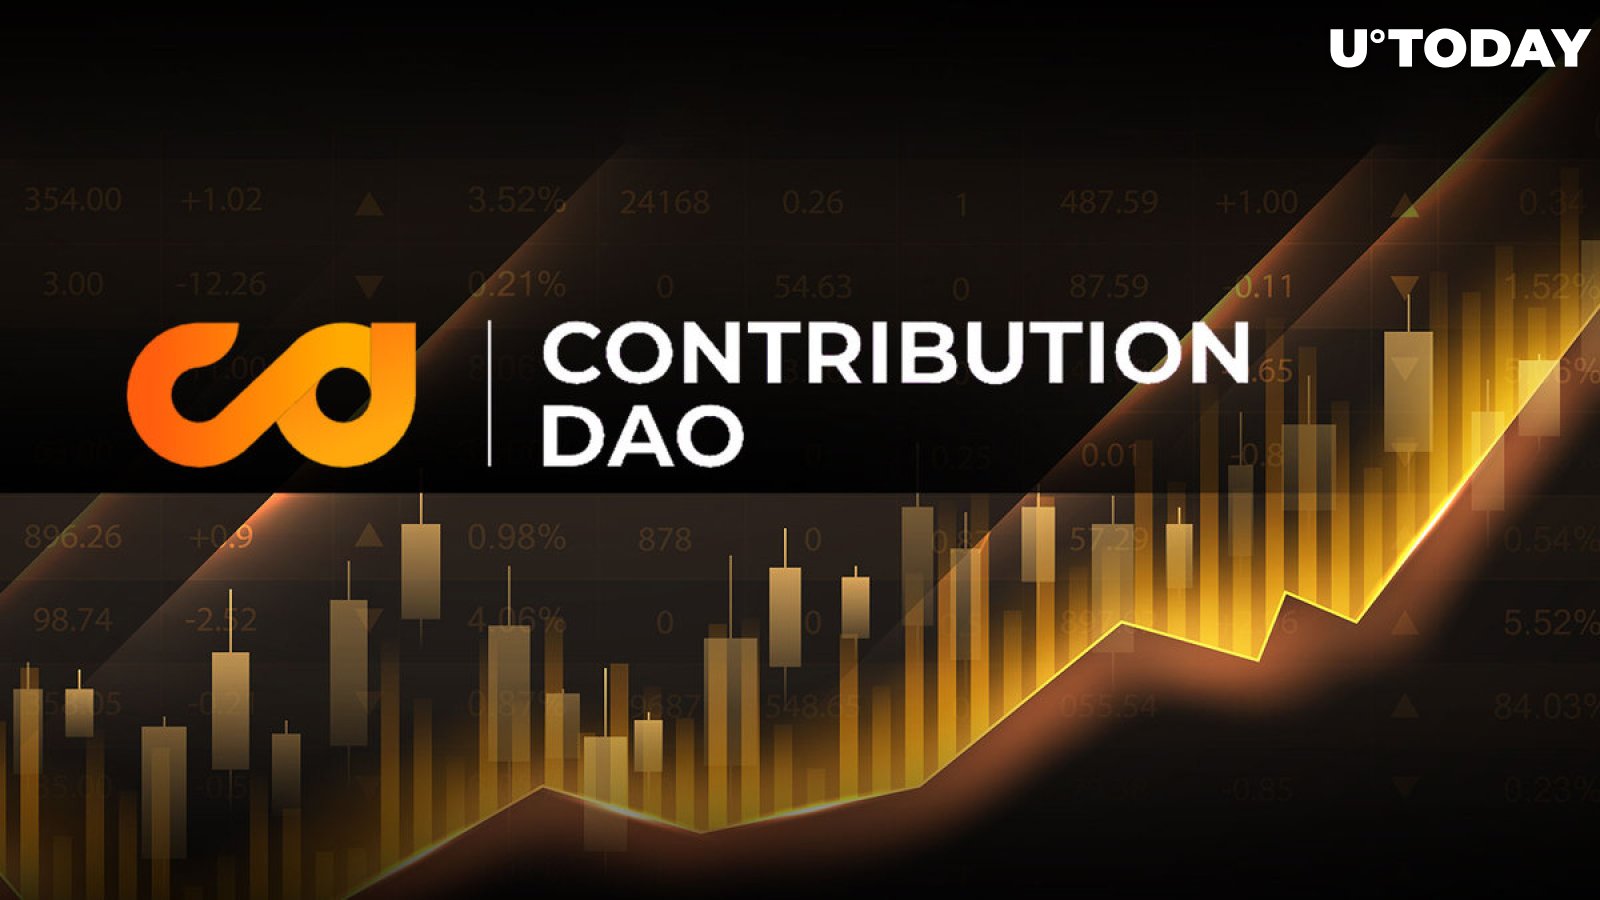 ContributionDAO Garners $2.8 Million for Staking Expansion in Southeast Asia